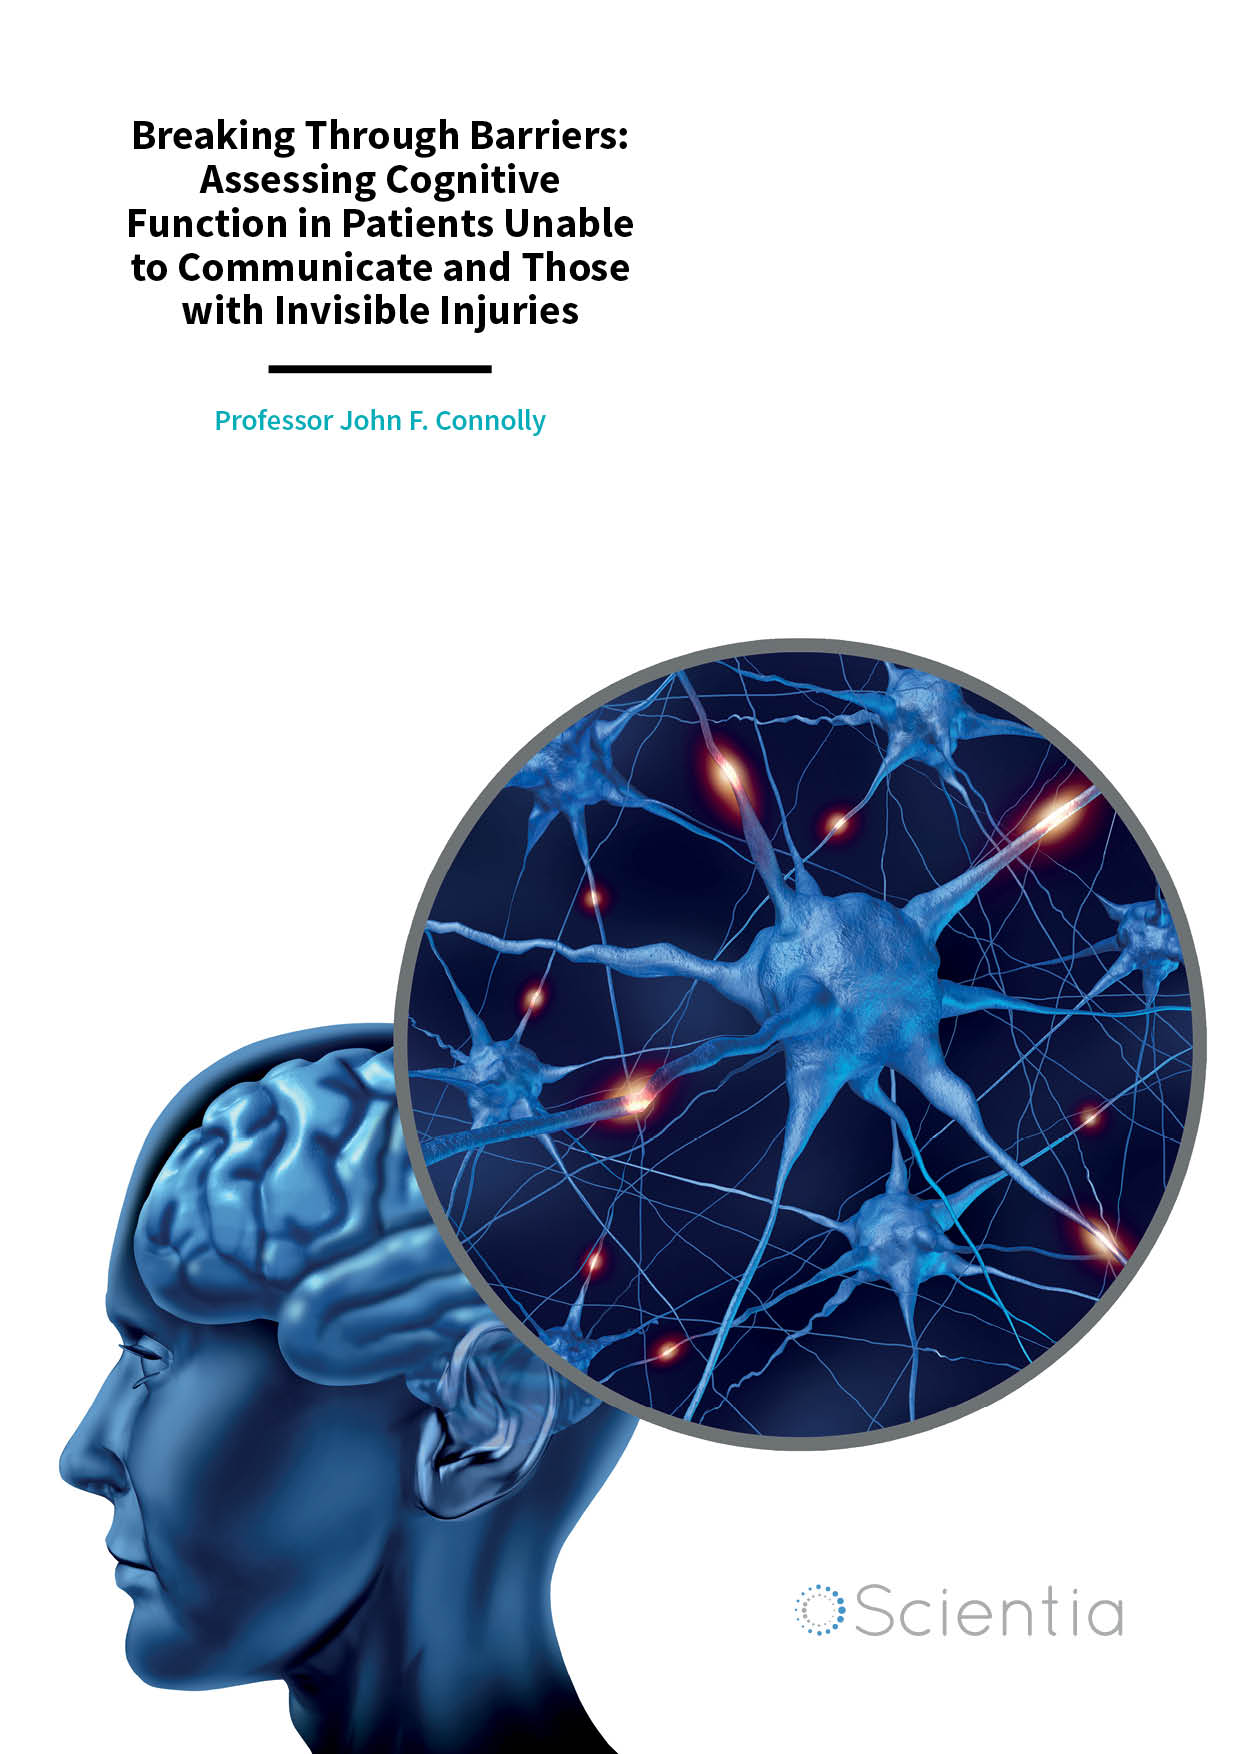 Professor John F. Connolly – Breaking Through Barriers: Assessing Cognitive Function in Patients Unable to Communicate and Those with Invisible Injuries